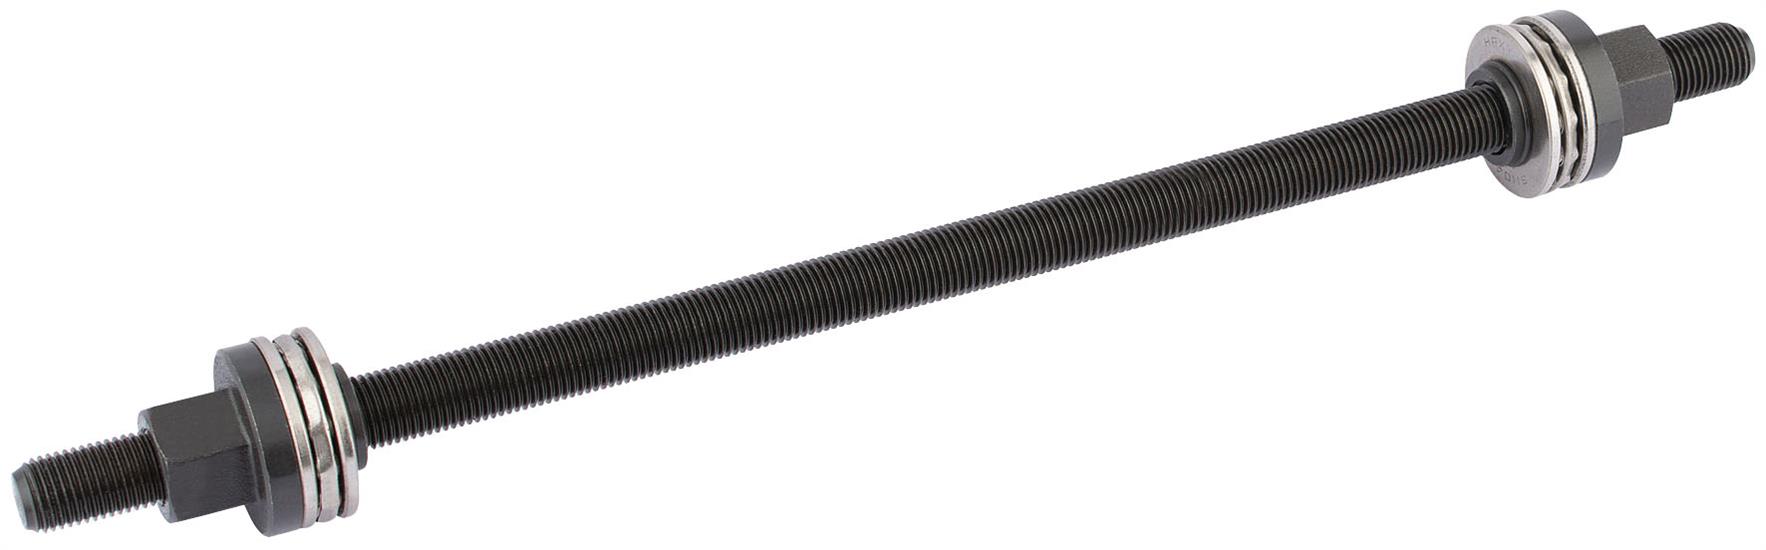 Draper 81037 (YBPK27) - M14 Spare Threaded Rod and Bearing for 59123 and 30816 Extraction Kit